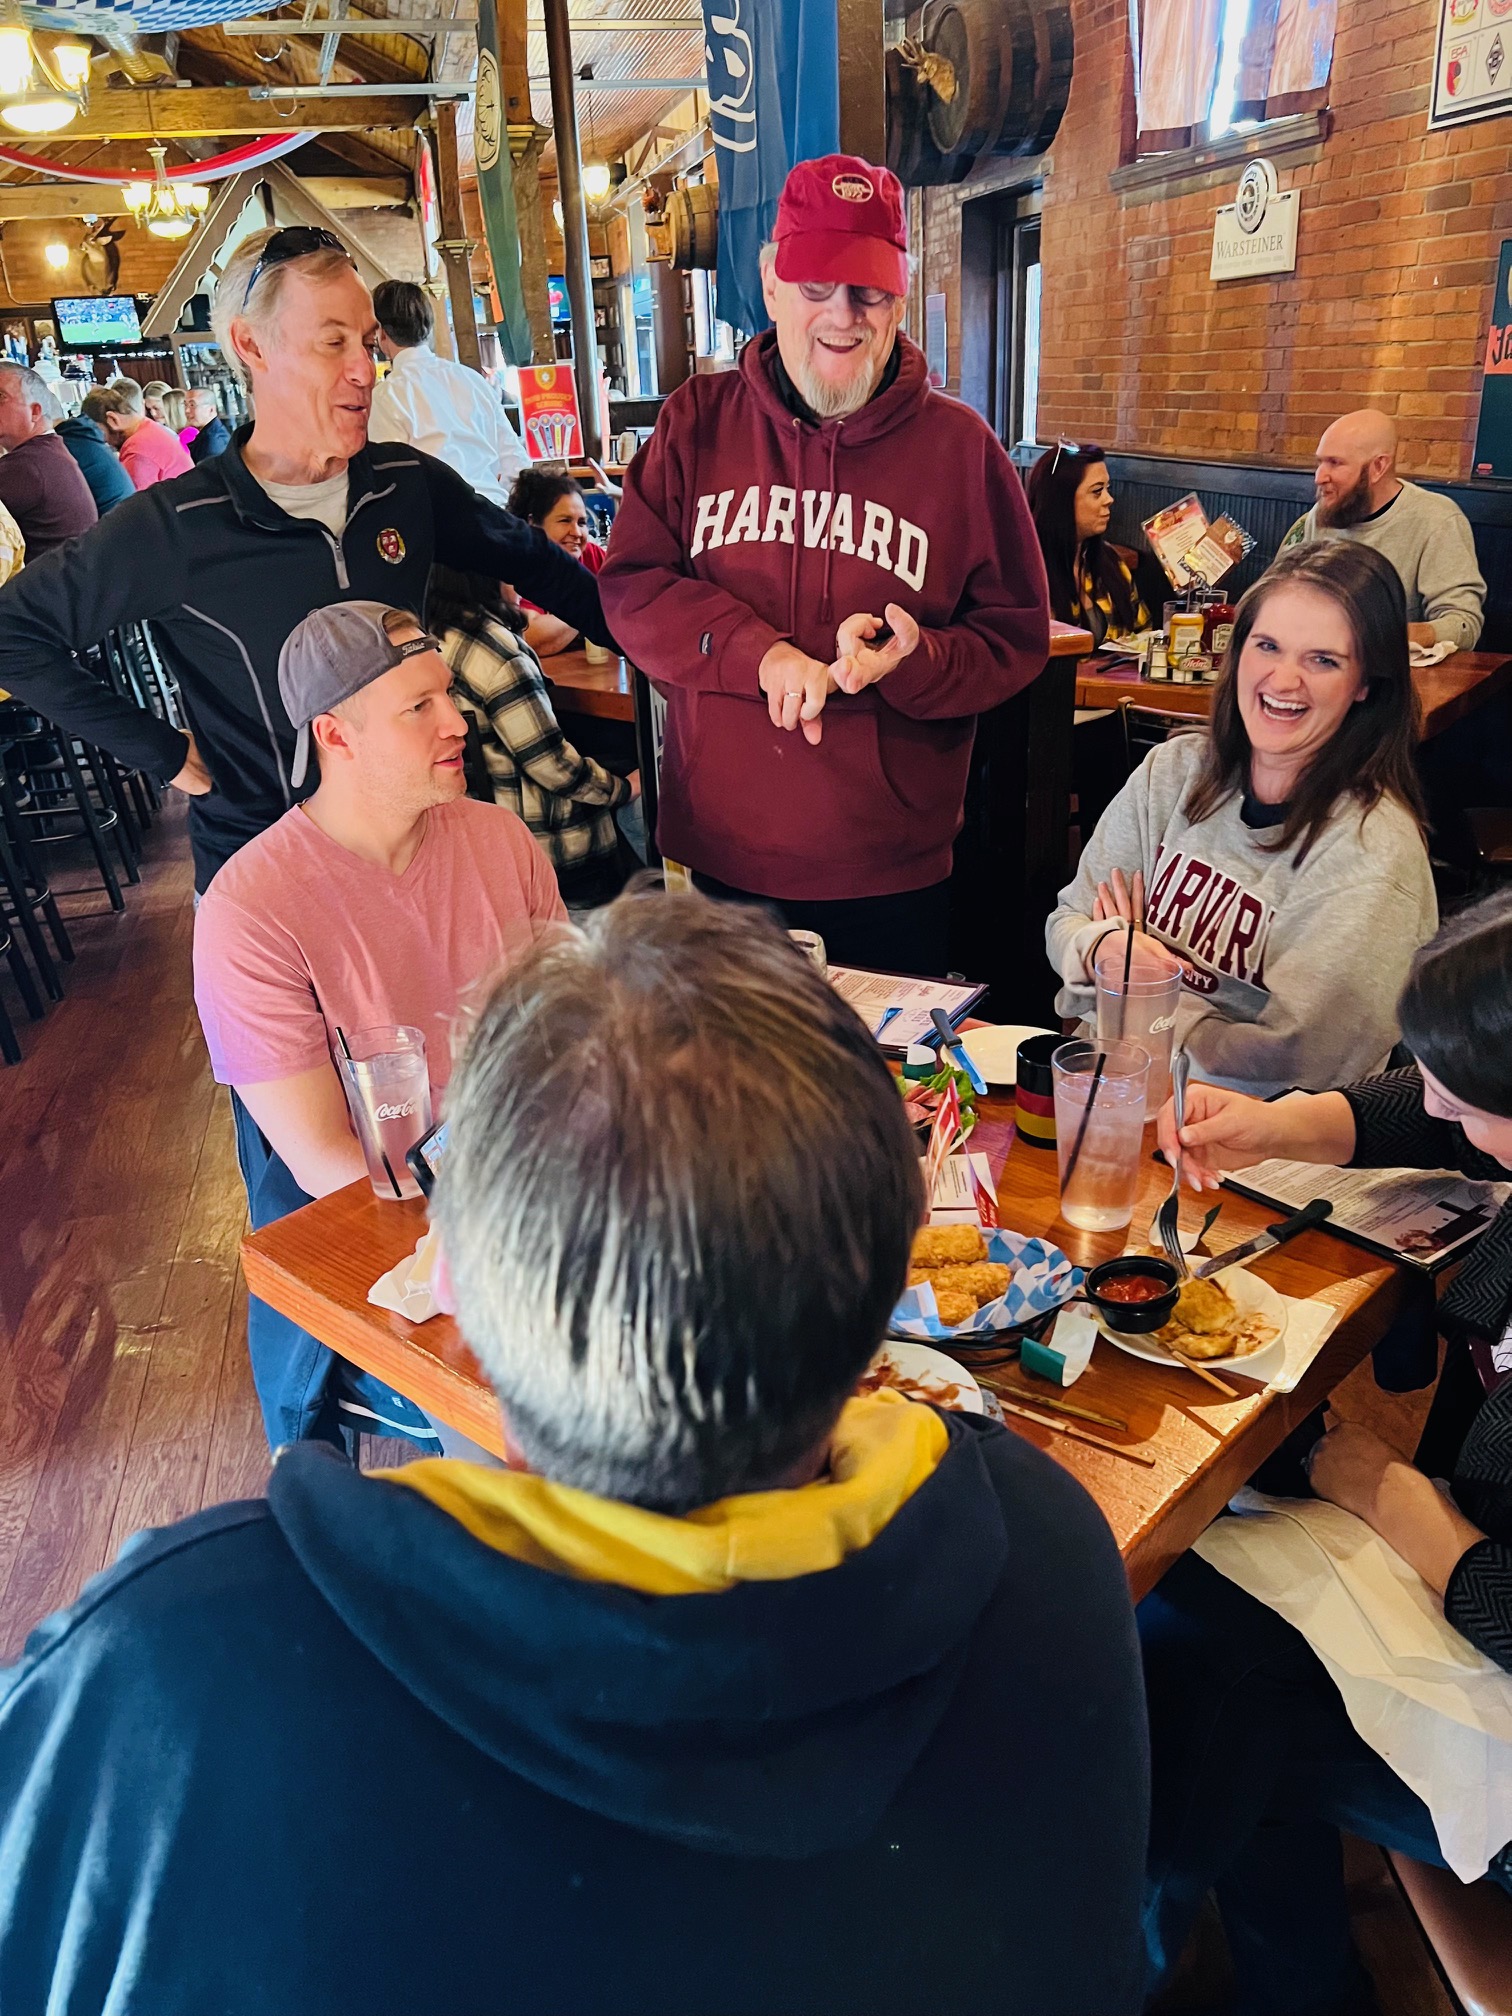 Harvard Club of Iowa members gathered at a table in a bar, chatting and laughing.